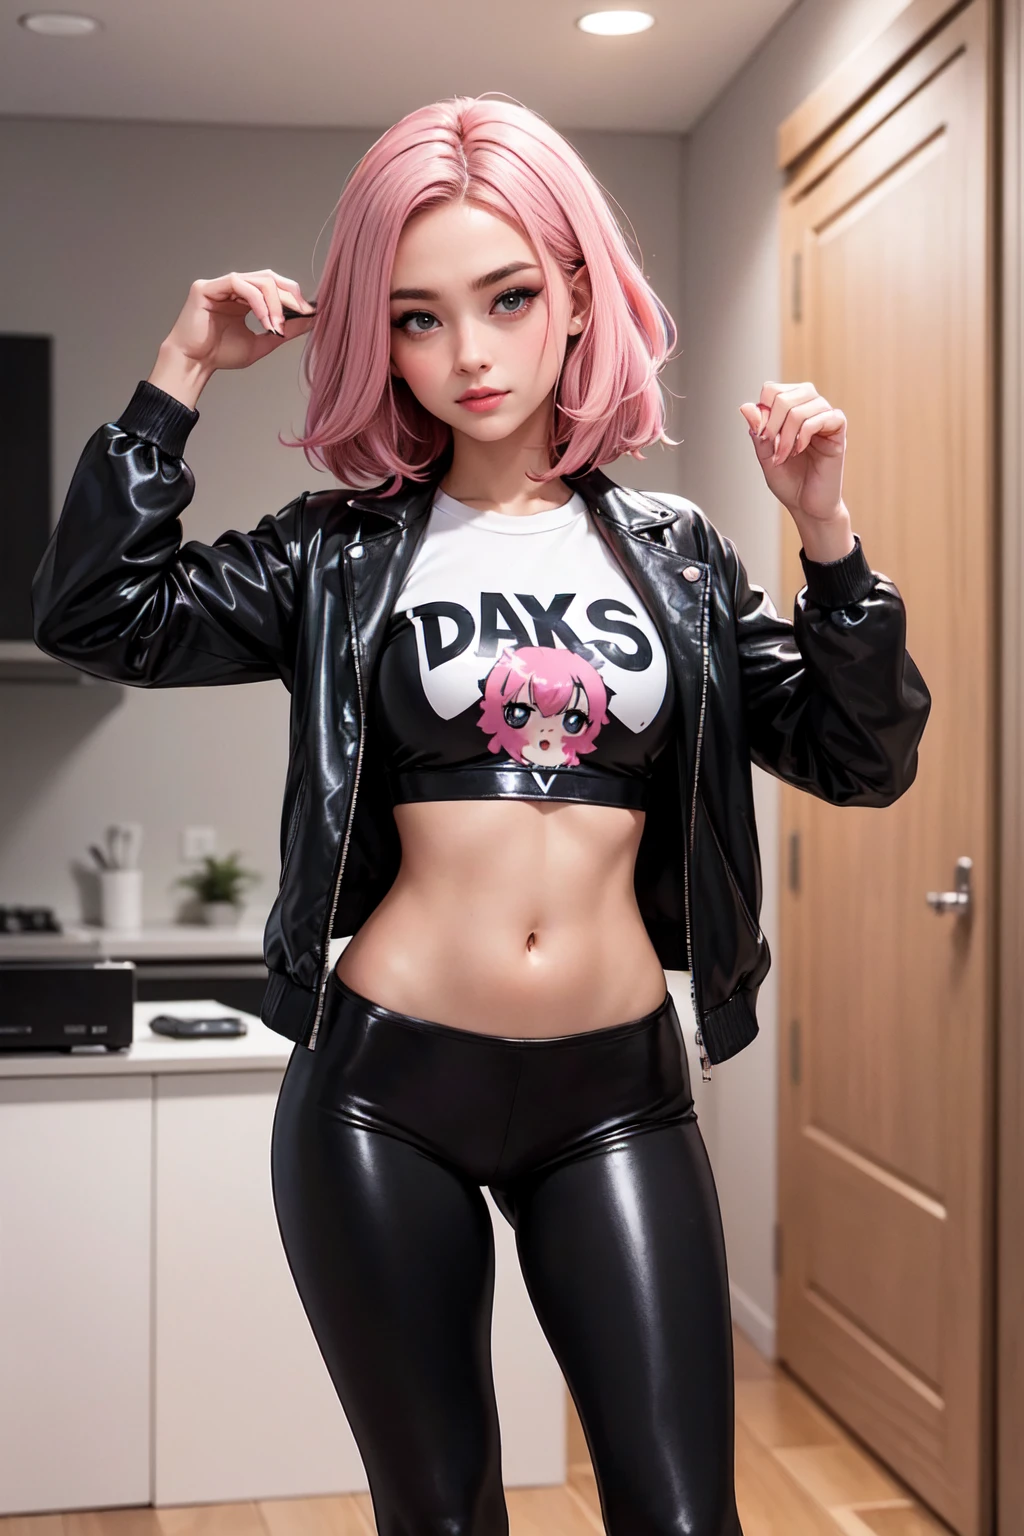 16 year old girl, beautiful girl, 184 cm, 40 kg,  often blushes from anxiety, pink punk hair, waers shiny clothes - leather jackets, cropped t-shirts, and very thick skin/Latex leggings,wears black and white sneakers. She is at home. Anatomically correct, hyperrealistic, award-winning, 4K